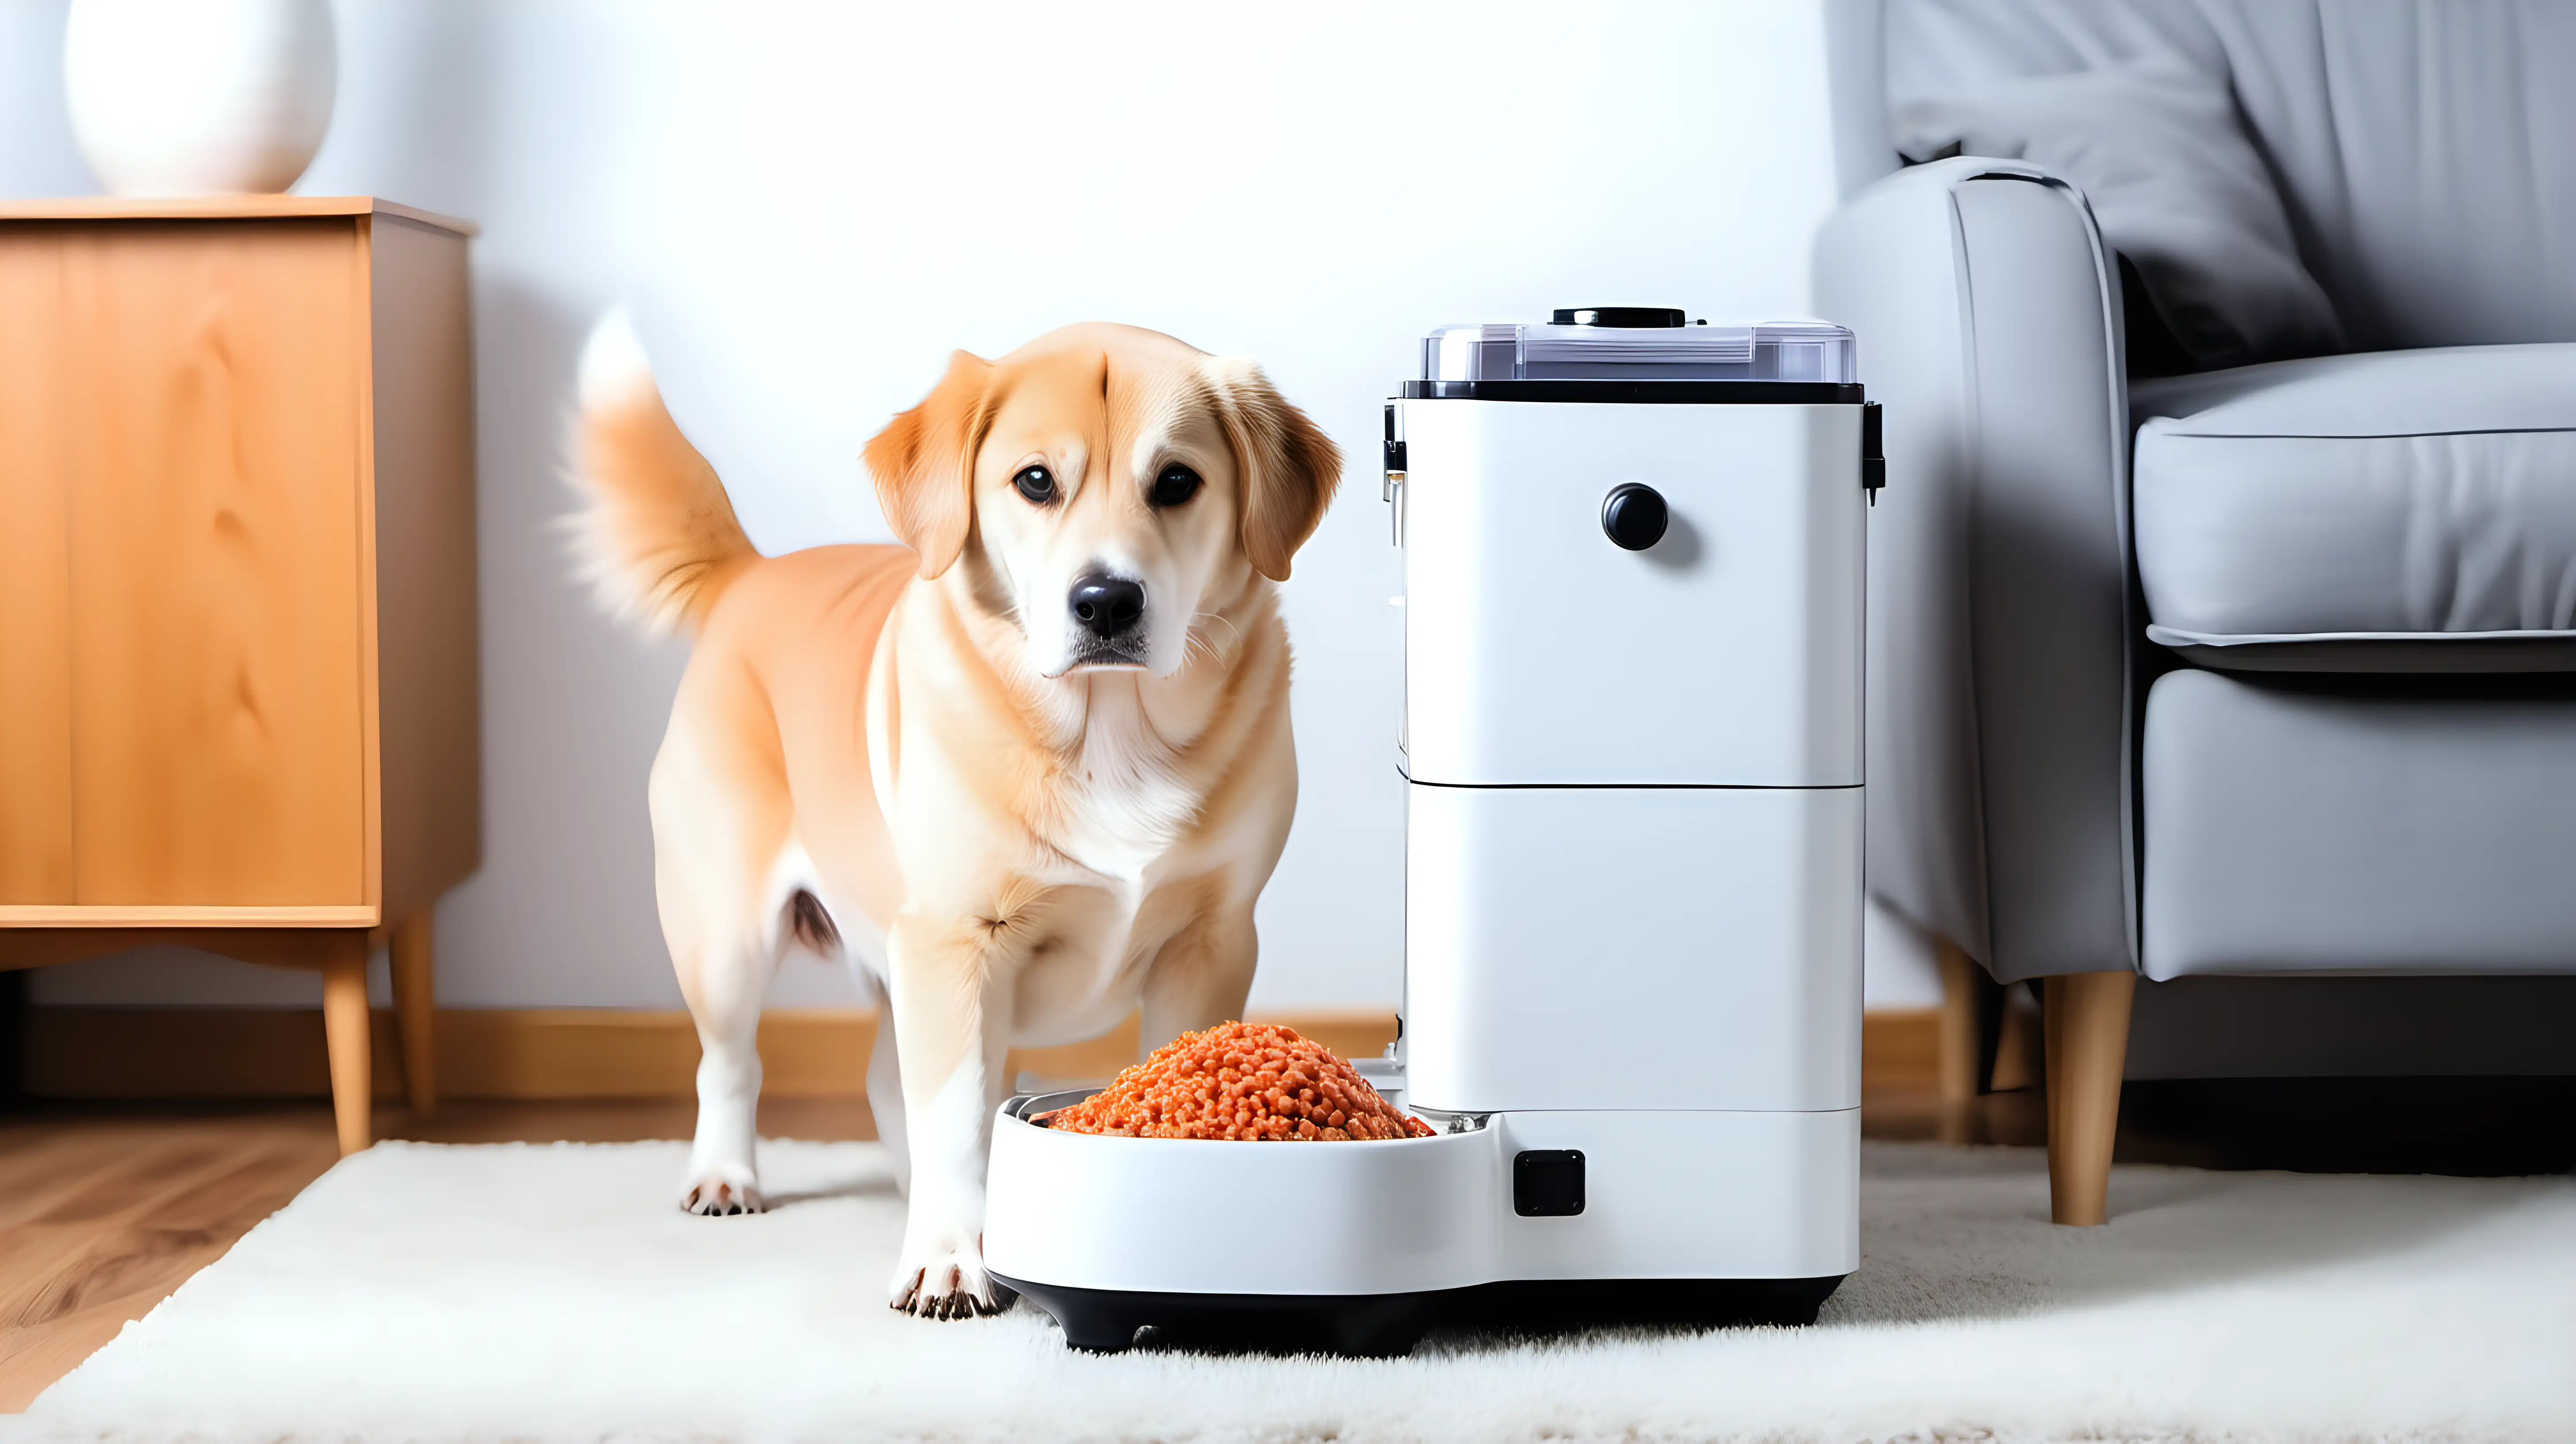 Dog with minimal automatic food machine, living room background, bright tone